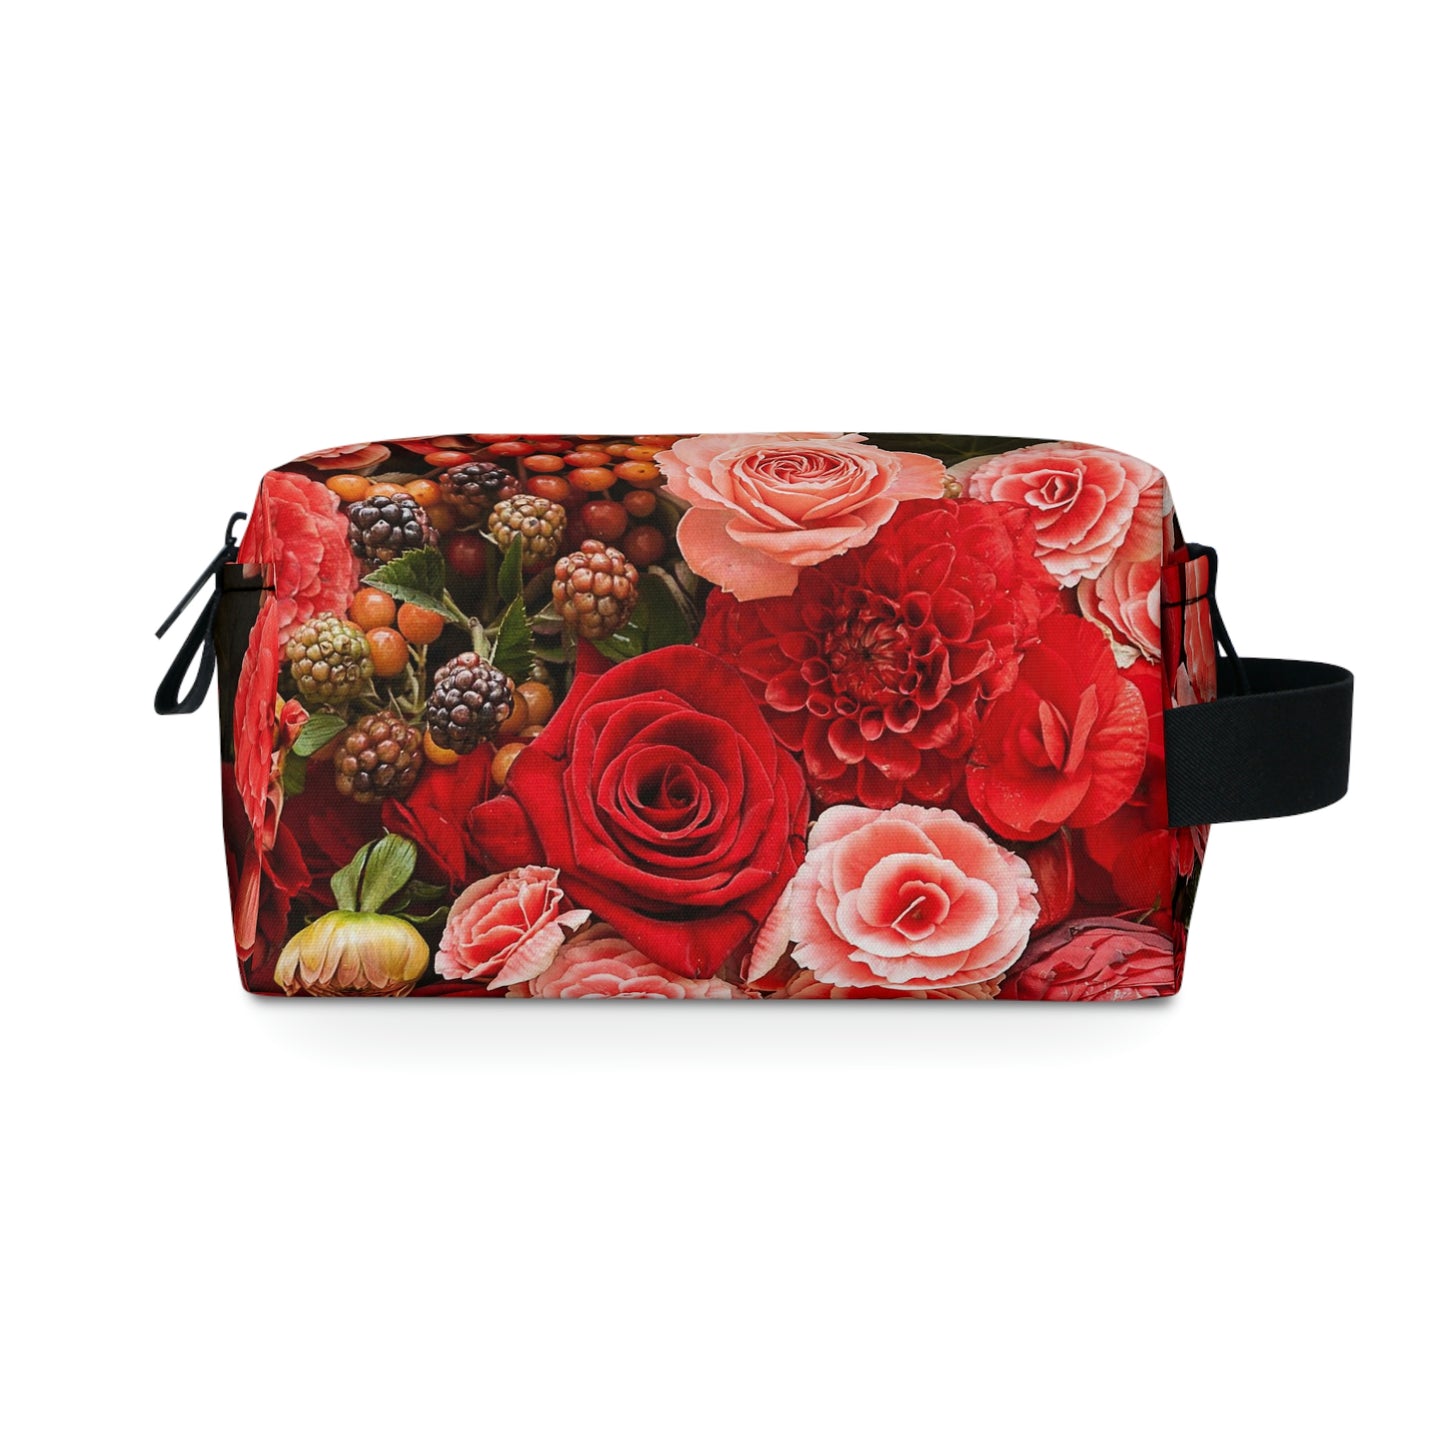 Collage of Flowers Toiletry Bag